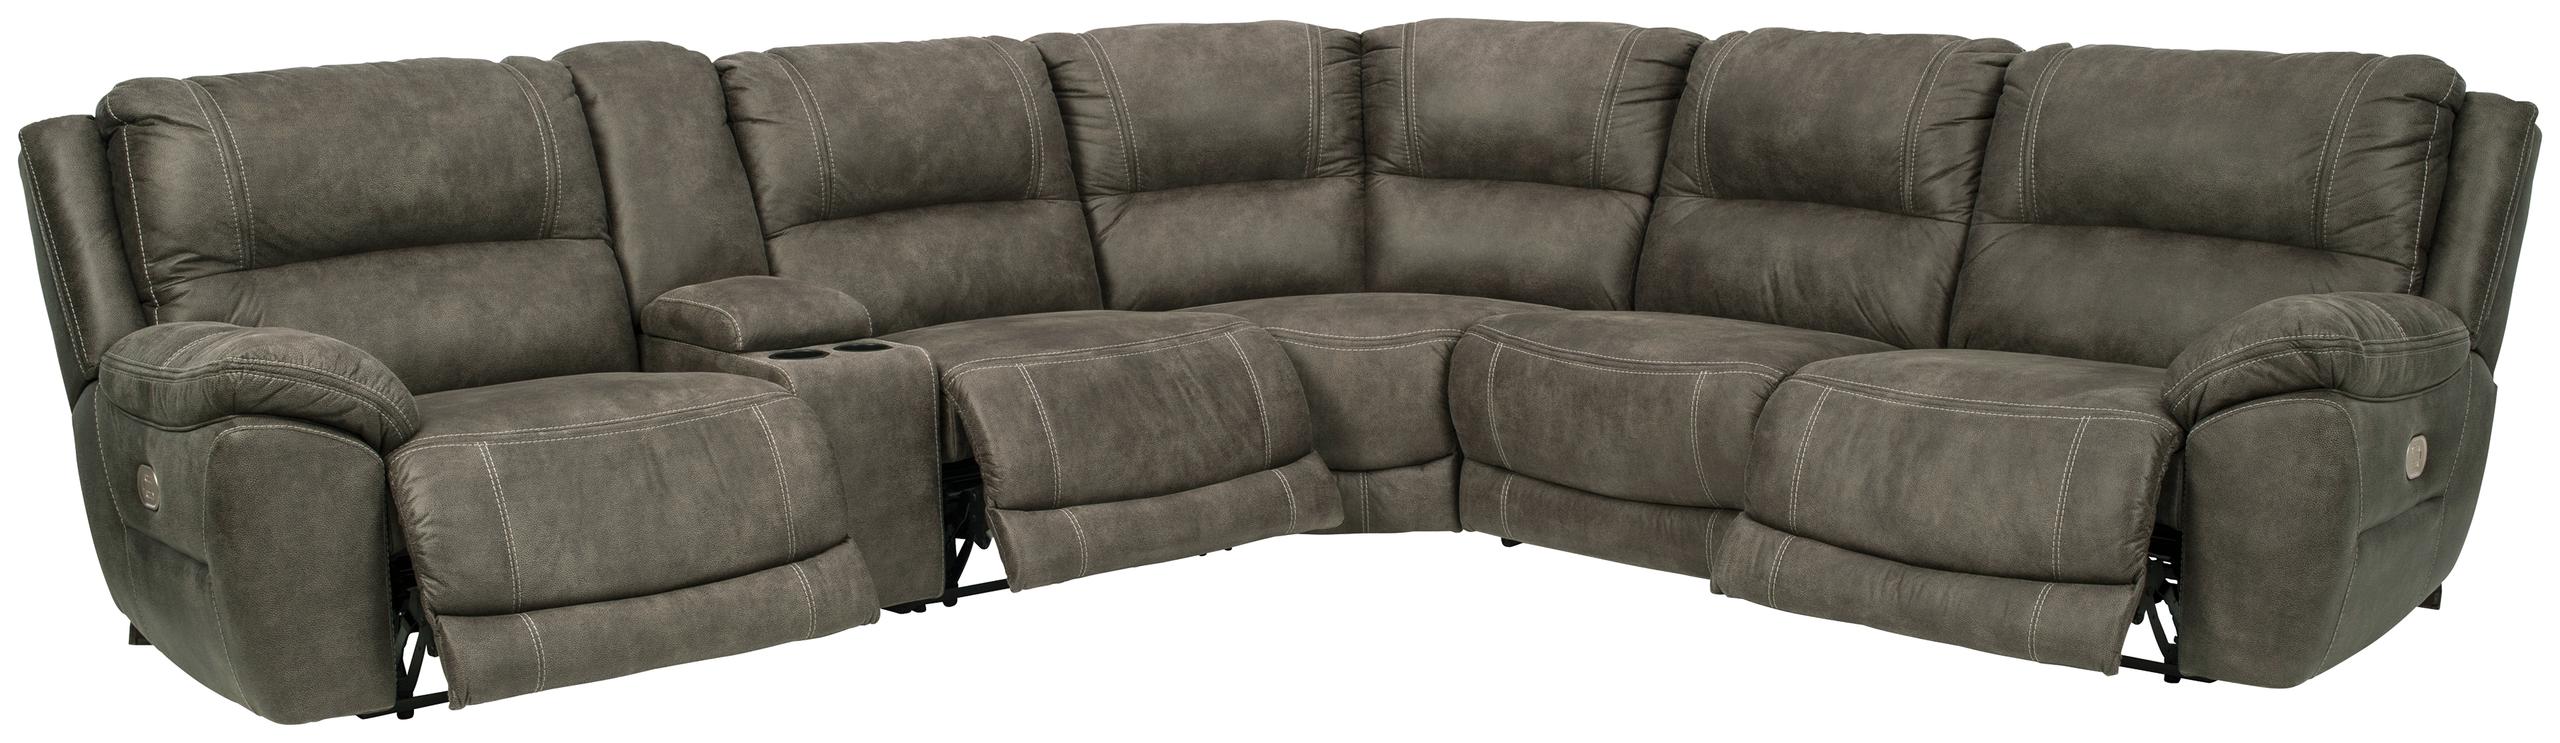 ASHLEY FURNITURE 51403S6 Cranedall 6-piece Power Reclining Sectional